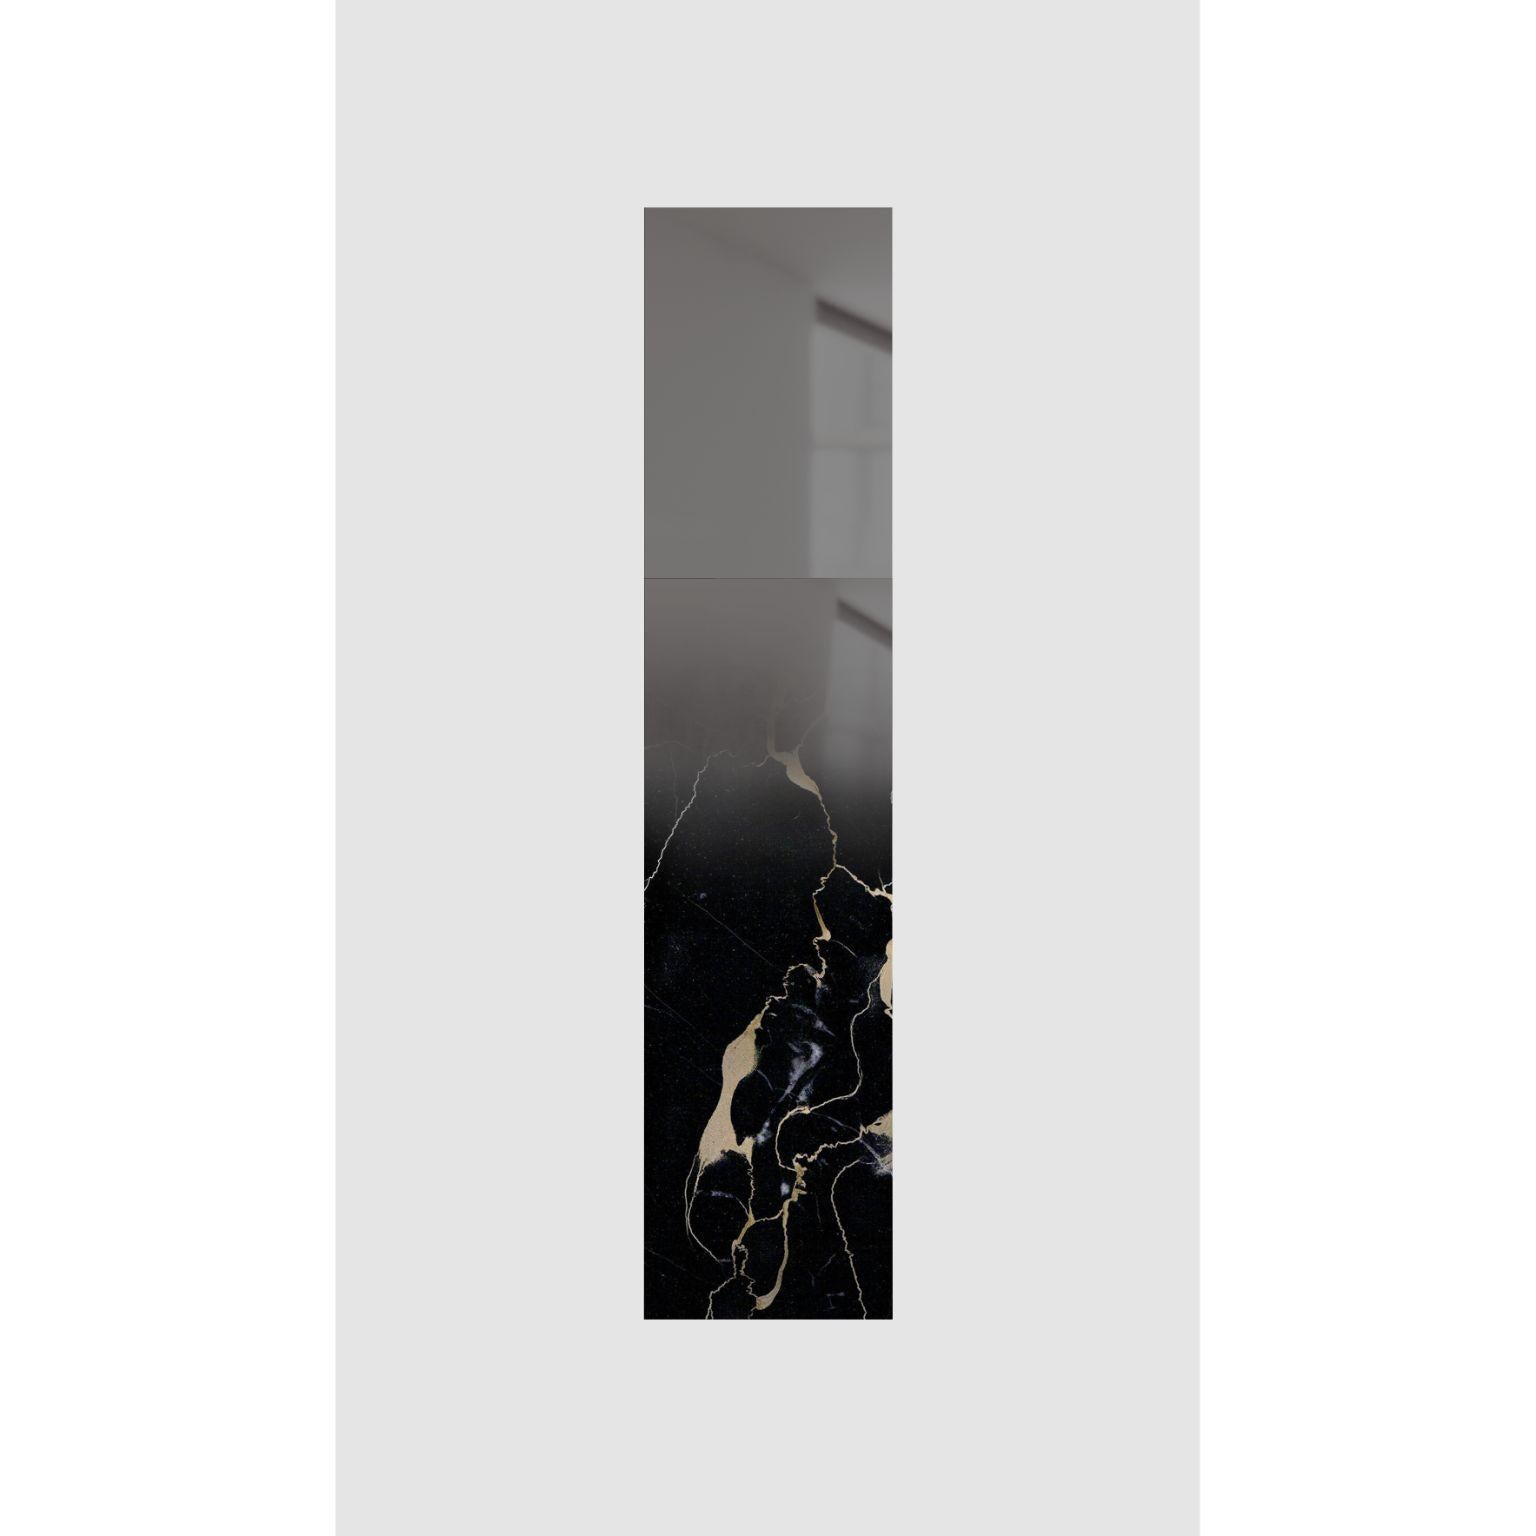 Black Mirror by Formaminima
Limited Edition
Dimensions: D 5 x W 35 x H 157.5 cm
Materials: Extra-thin solid Portoro Gold vein marble, hand-ground dark grey crystal layering with fading mirror finish applied by hand Flush wall metal